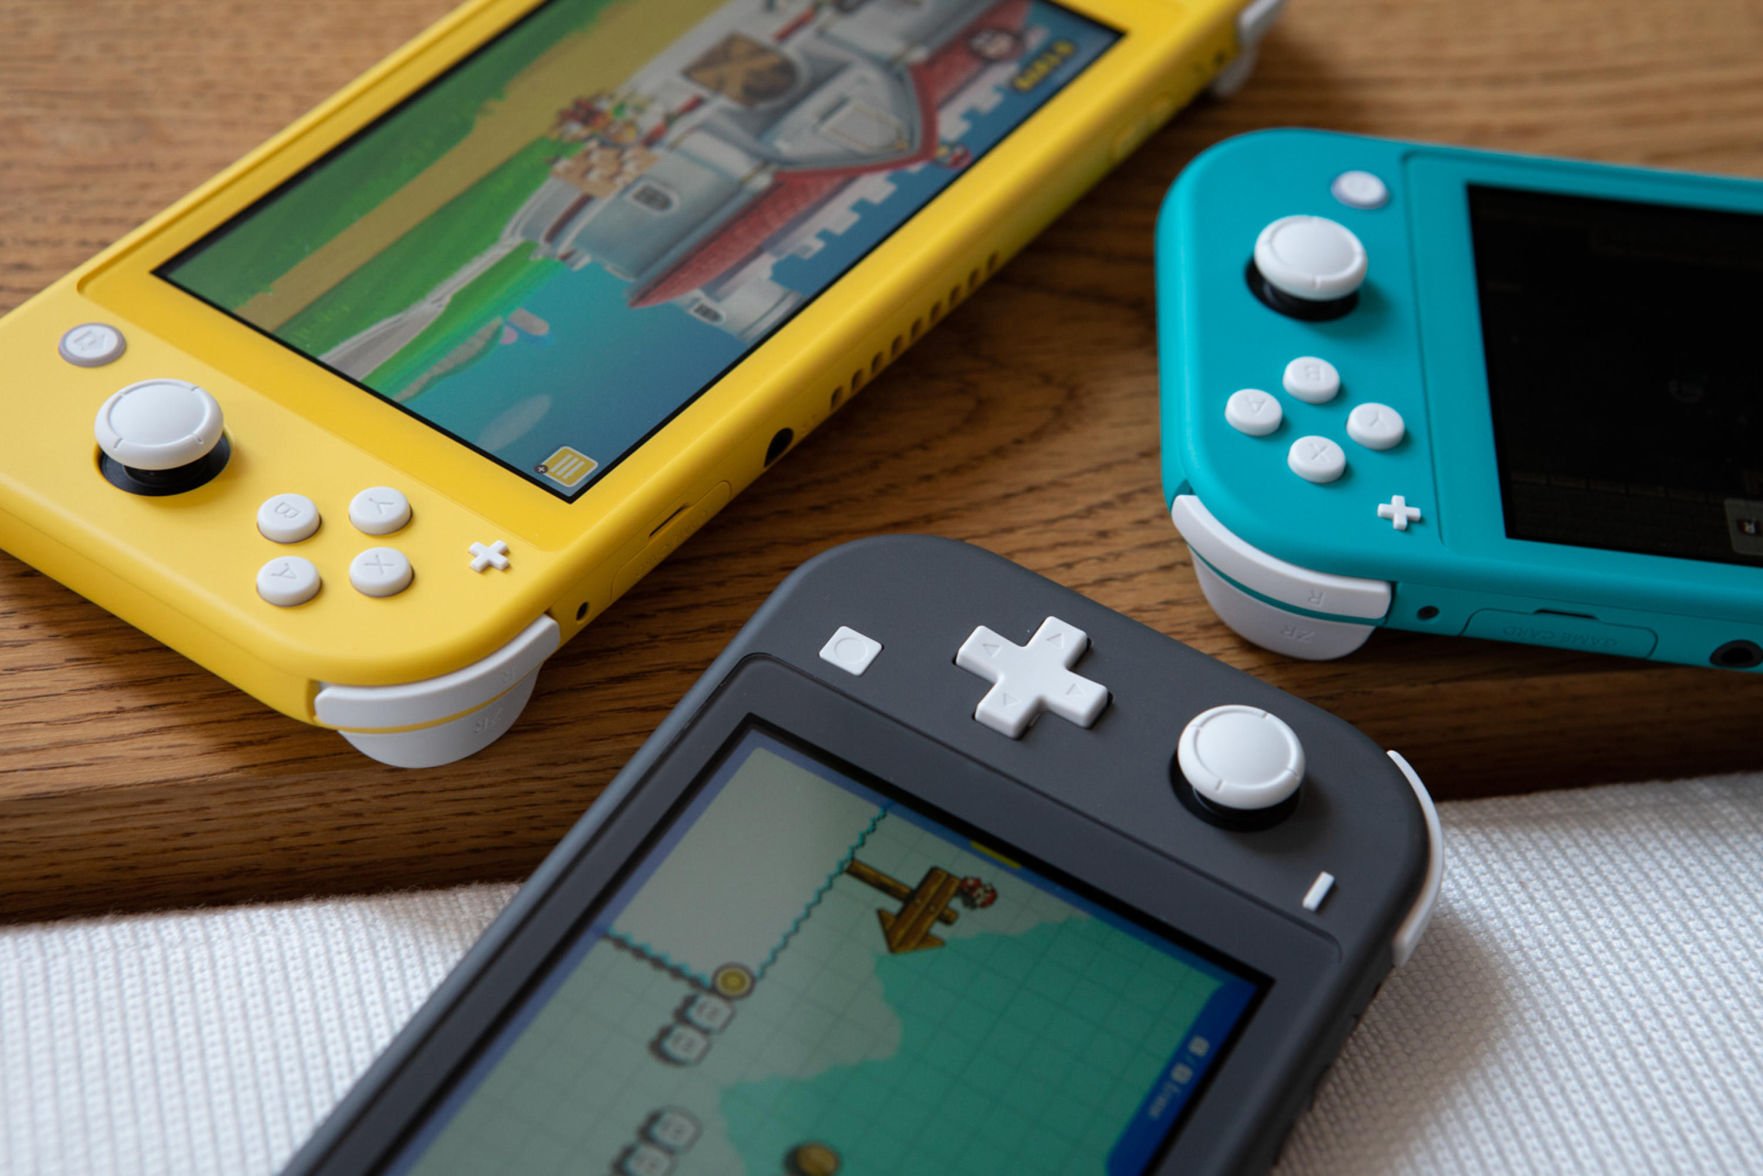 can you play clubhouse games on switch lite